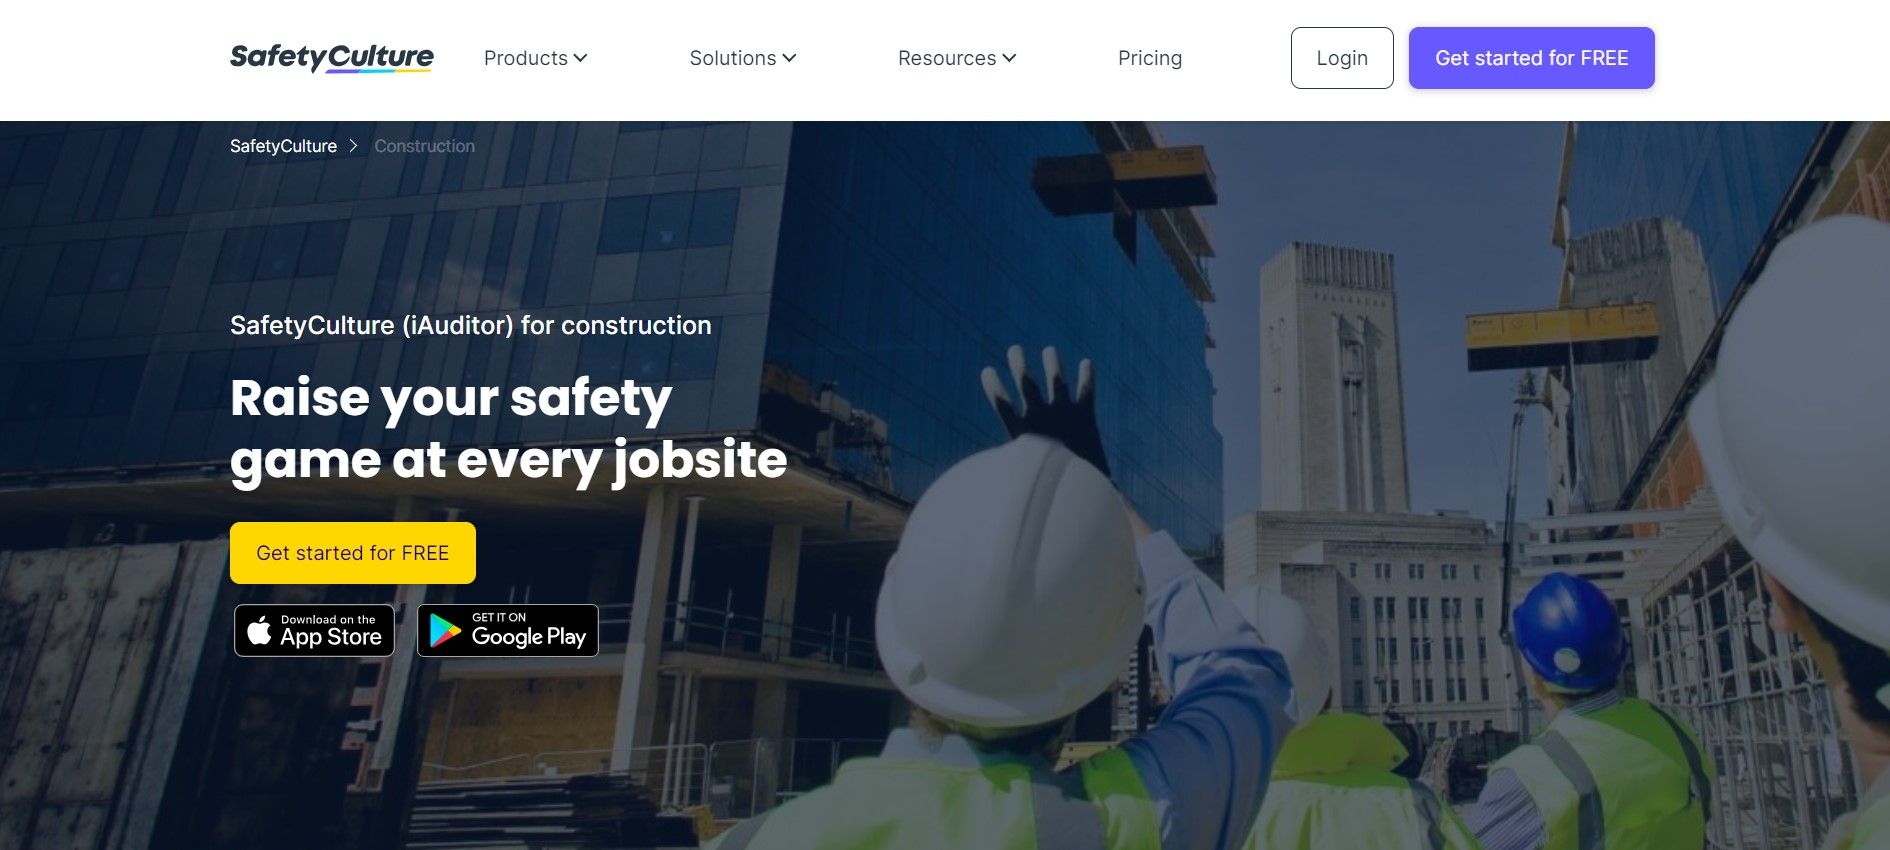 Homepage of SafetyCulture and image showing construction workers looking upwards at a building